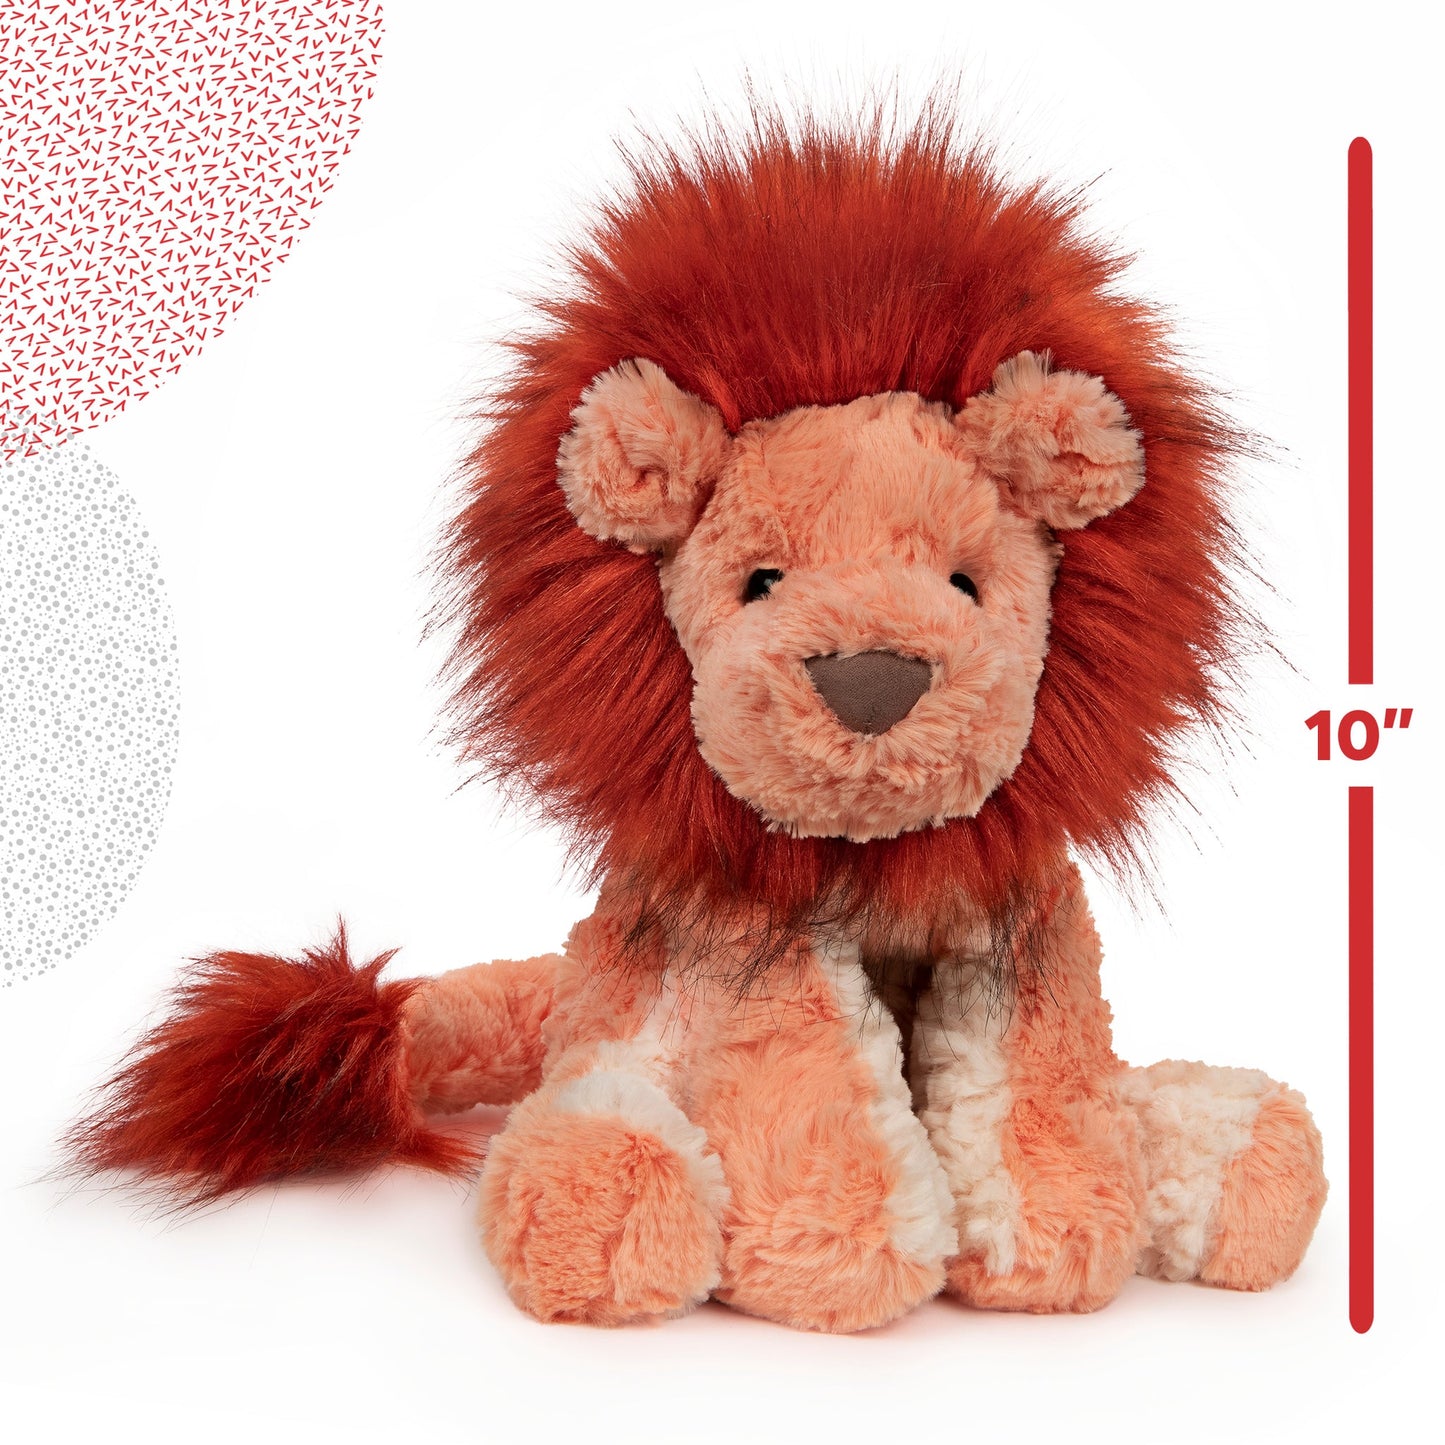 COZYS LION, 10 IN